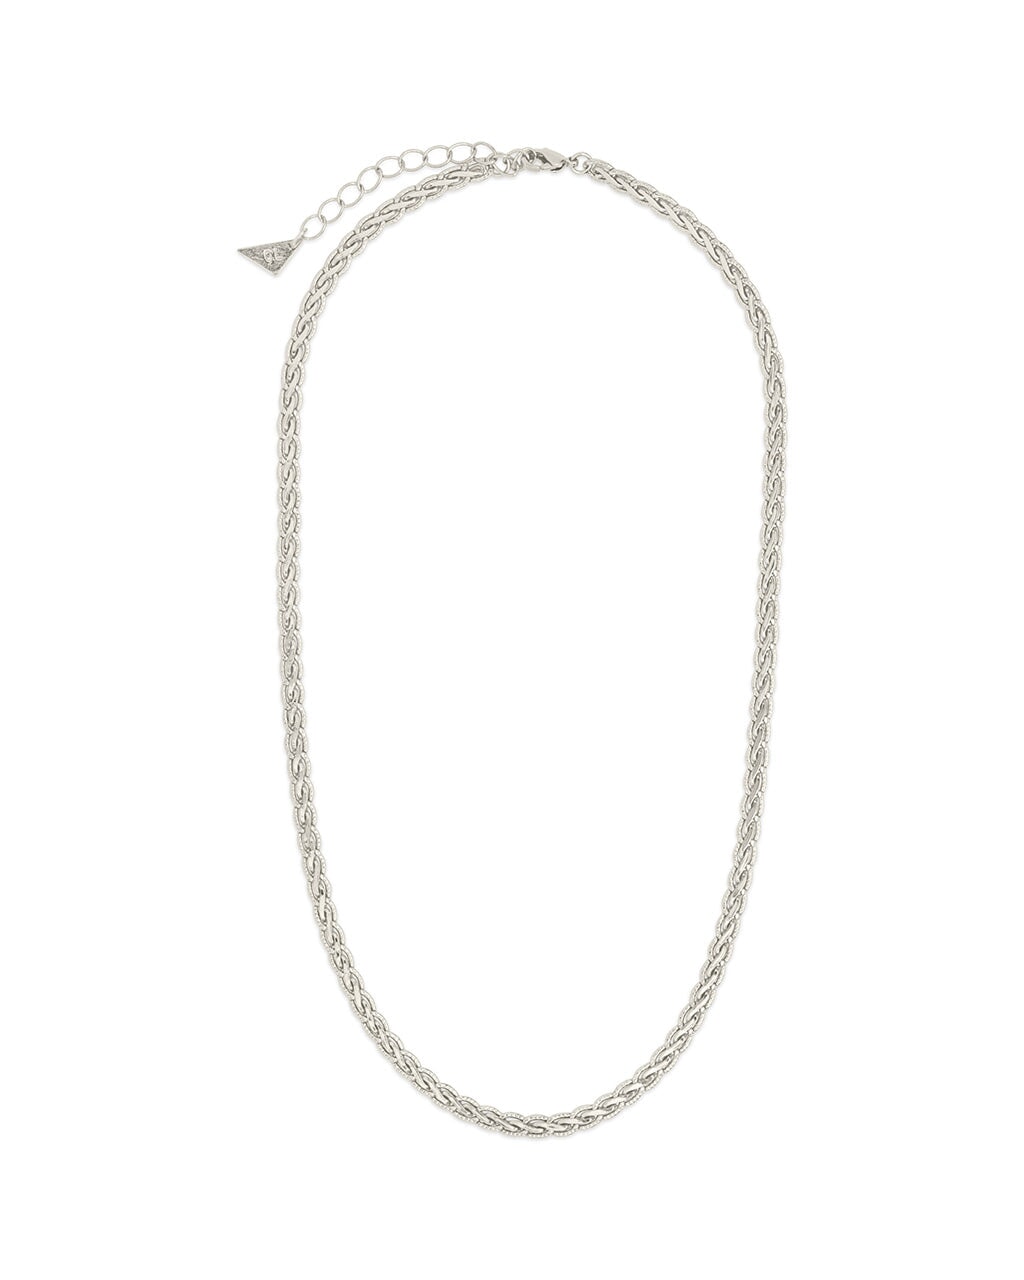 Larissa Chain Necklace Necklace Sterling Forever 